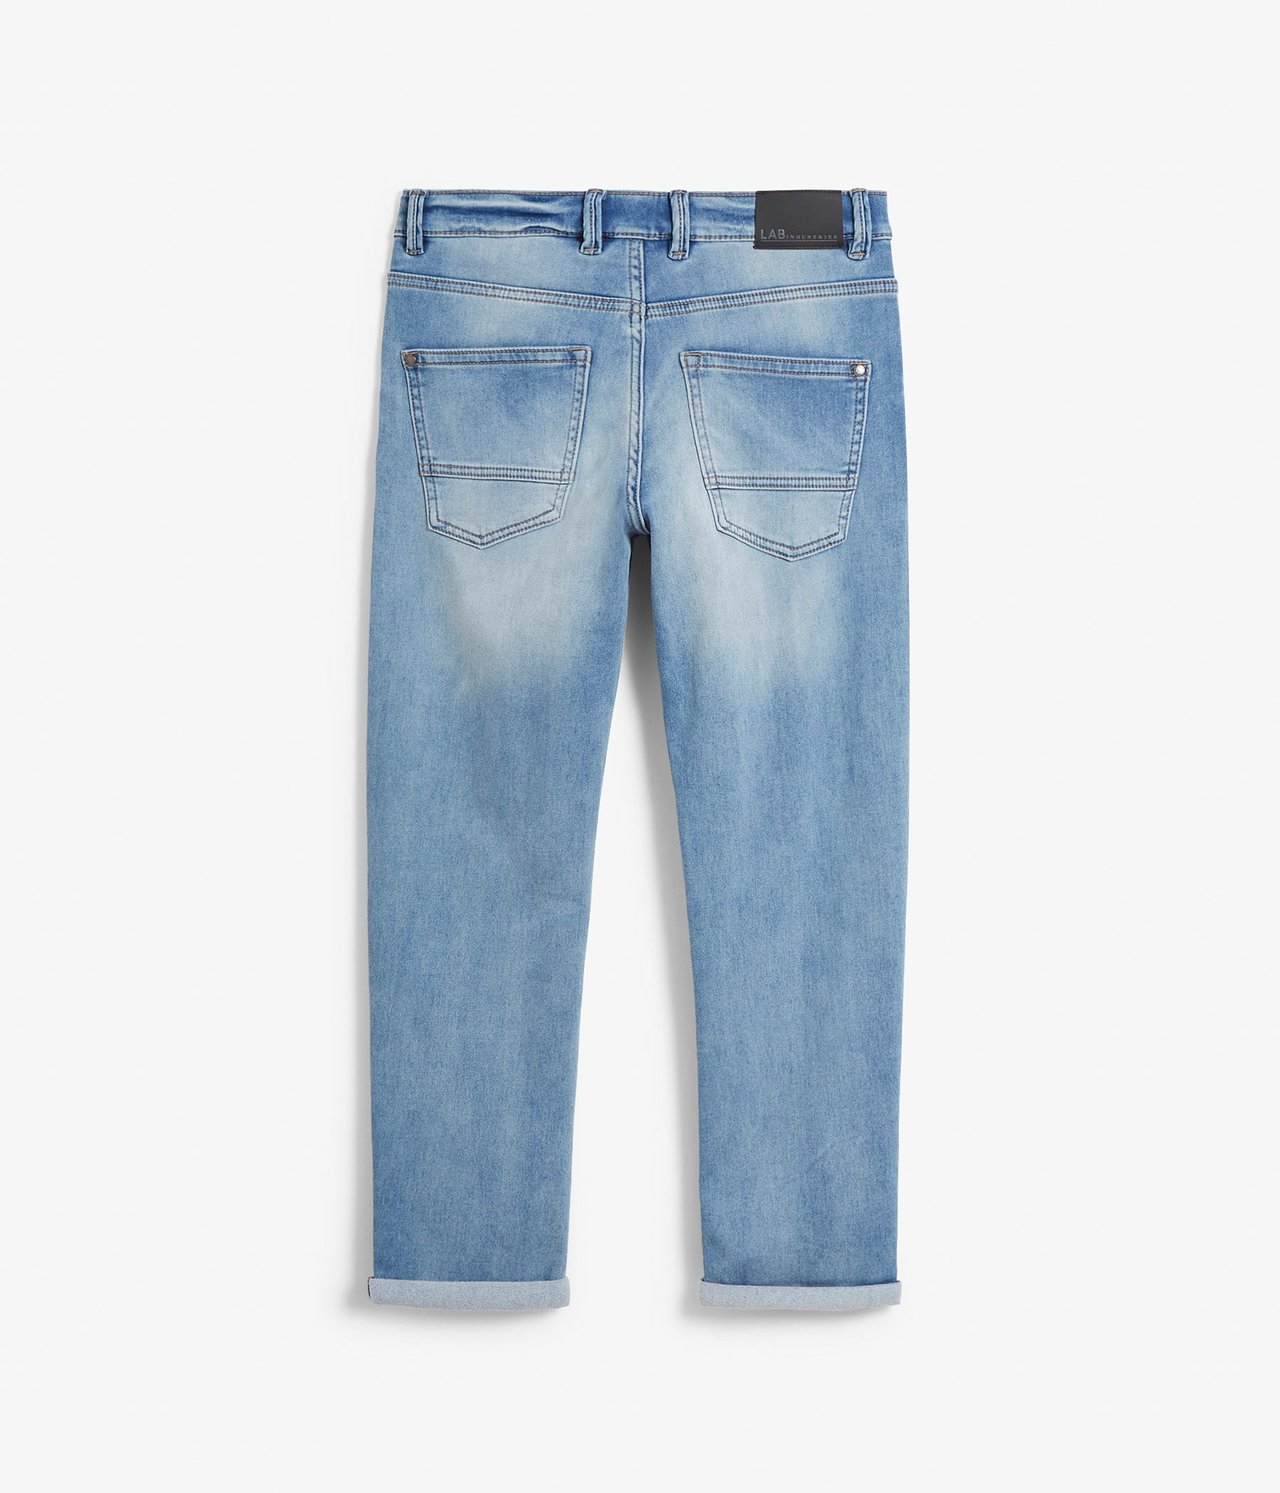 Eddy jeans relaxed fit Ljus denim - null - 6